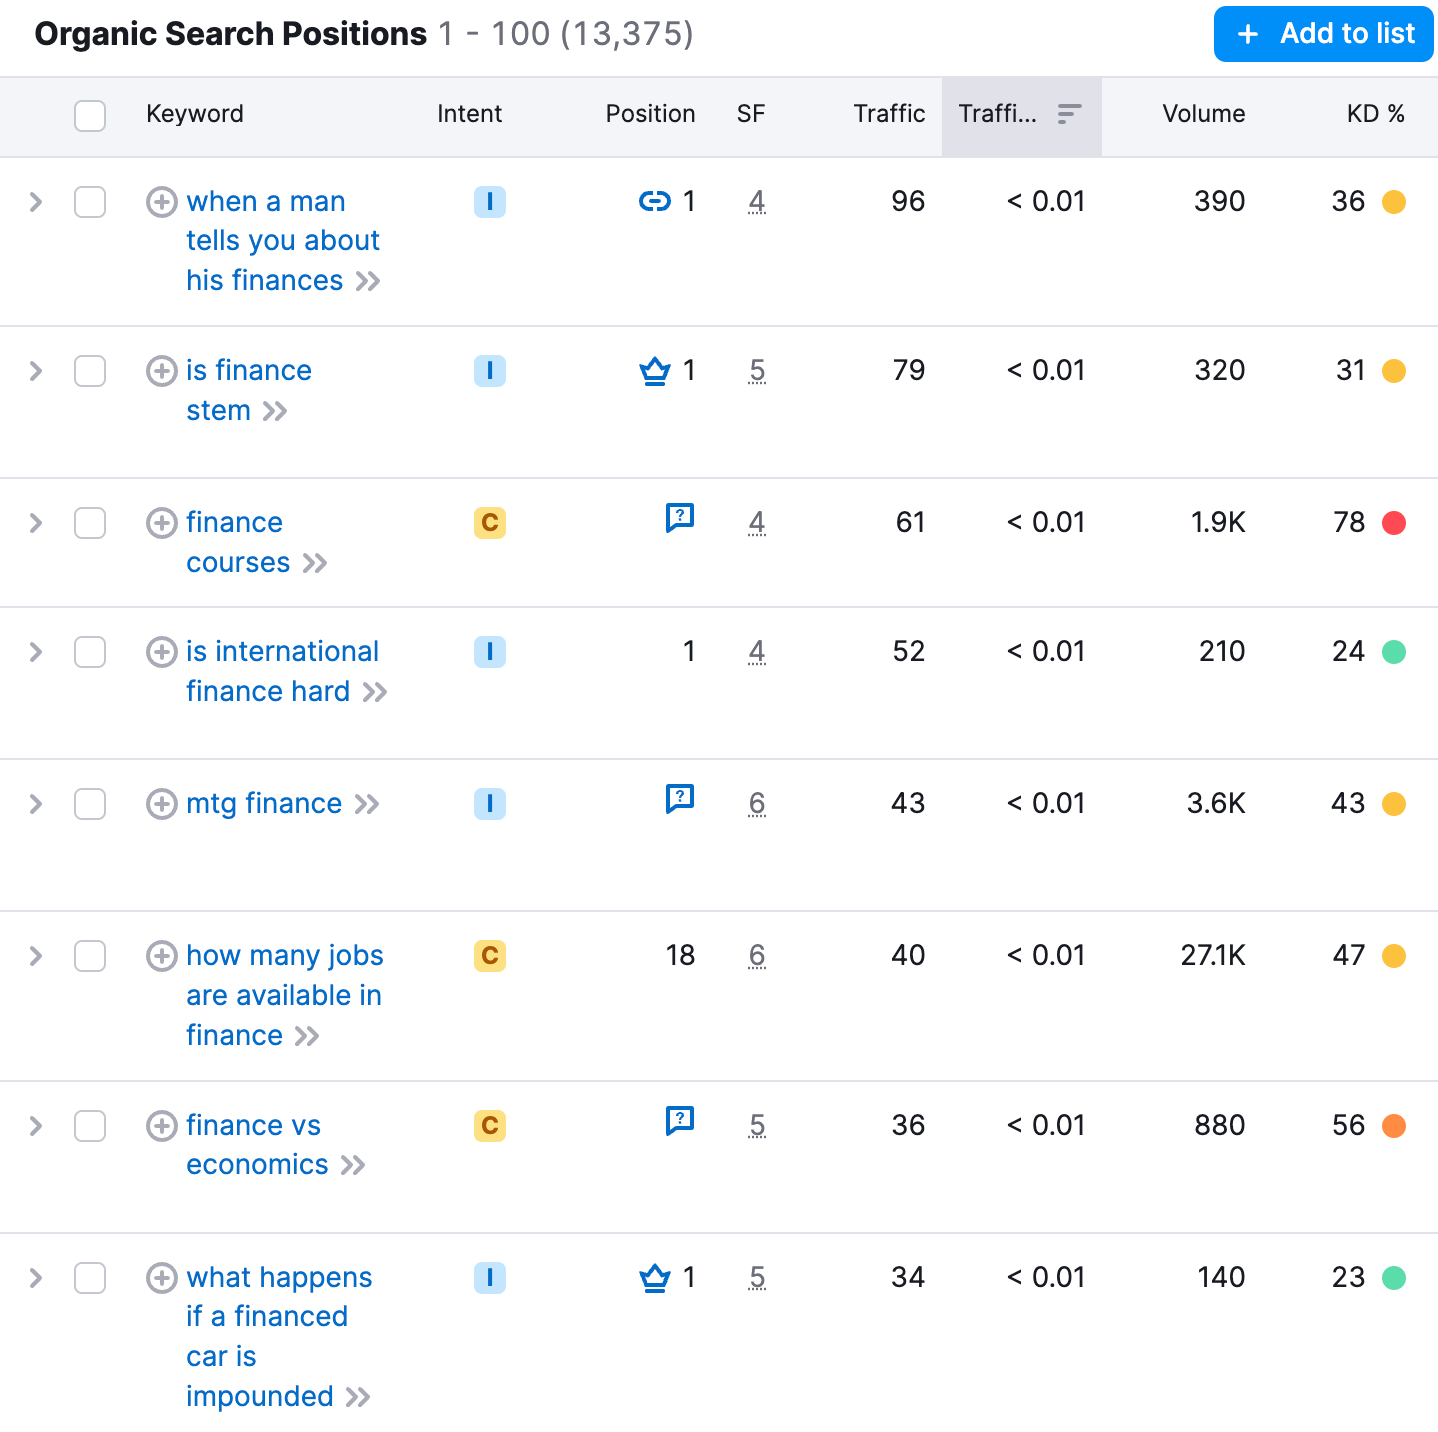 "Organic Search Positions" report displaying a wide range of keywords